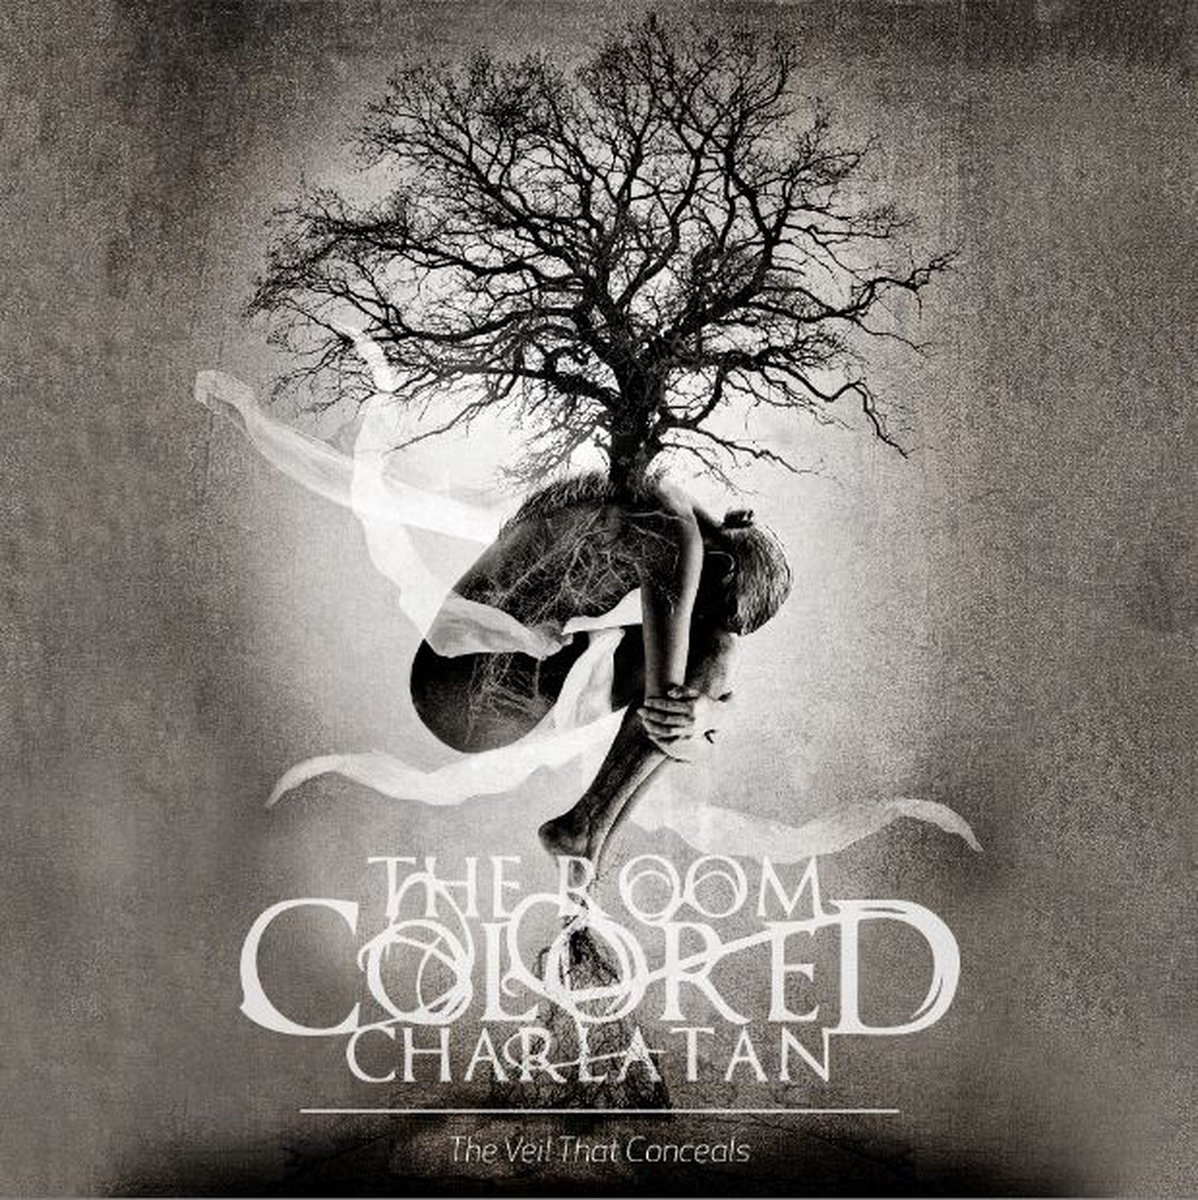 The Room Colored Charlatan - The Veil That Conceals (2016)